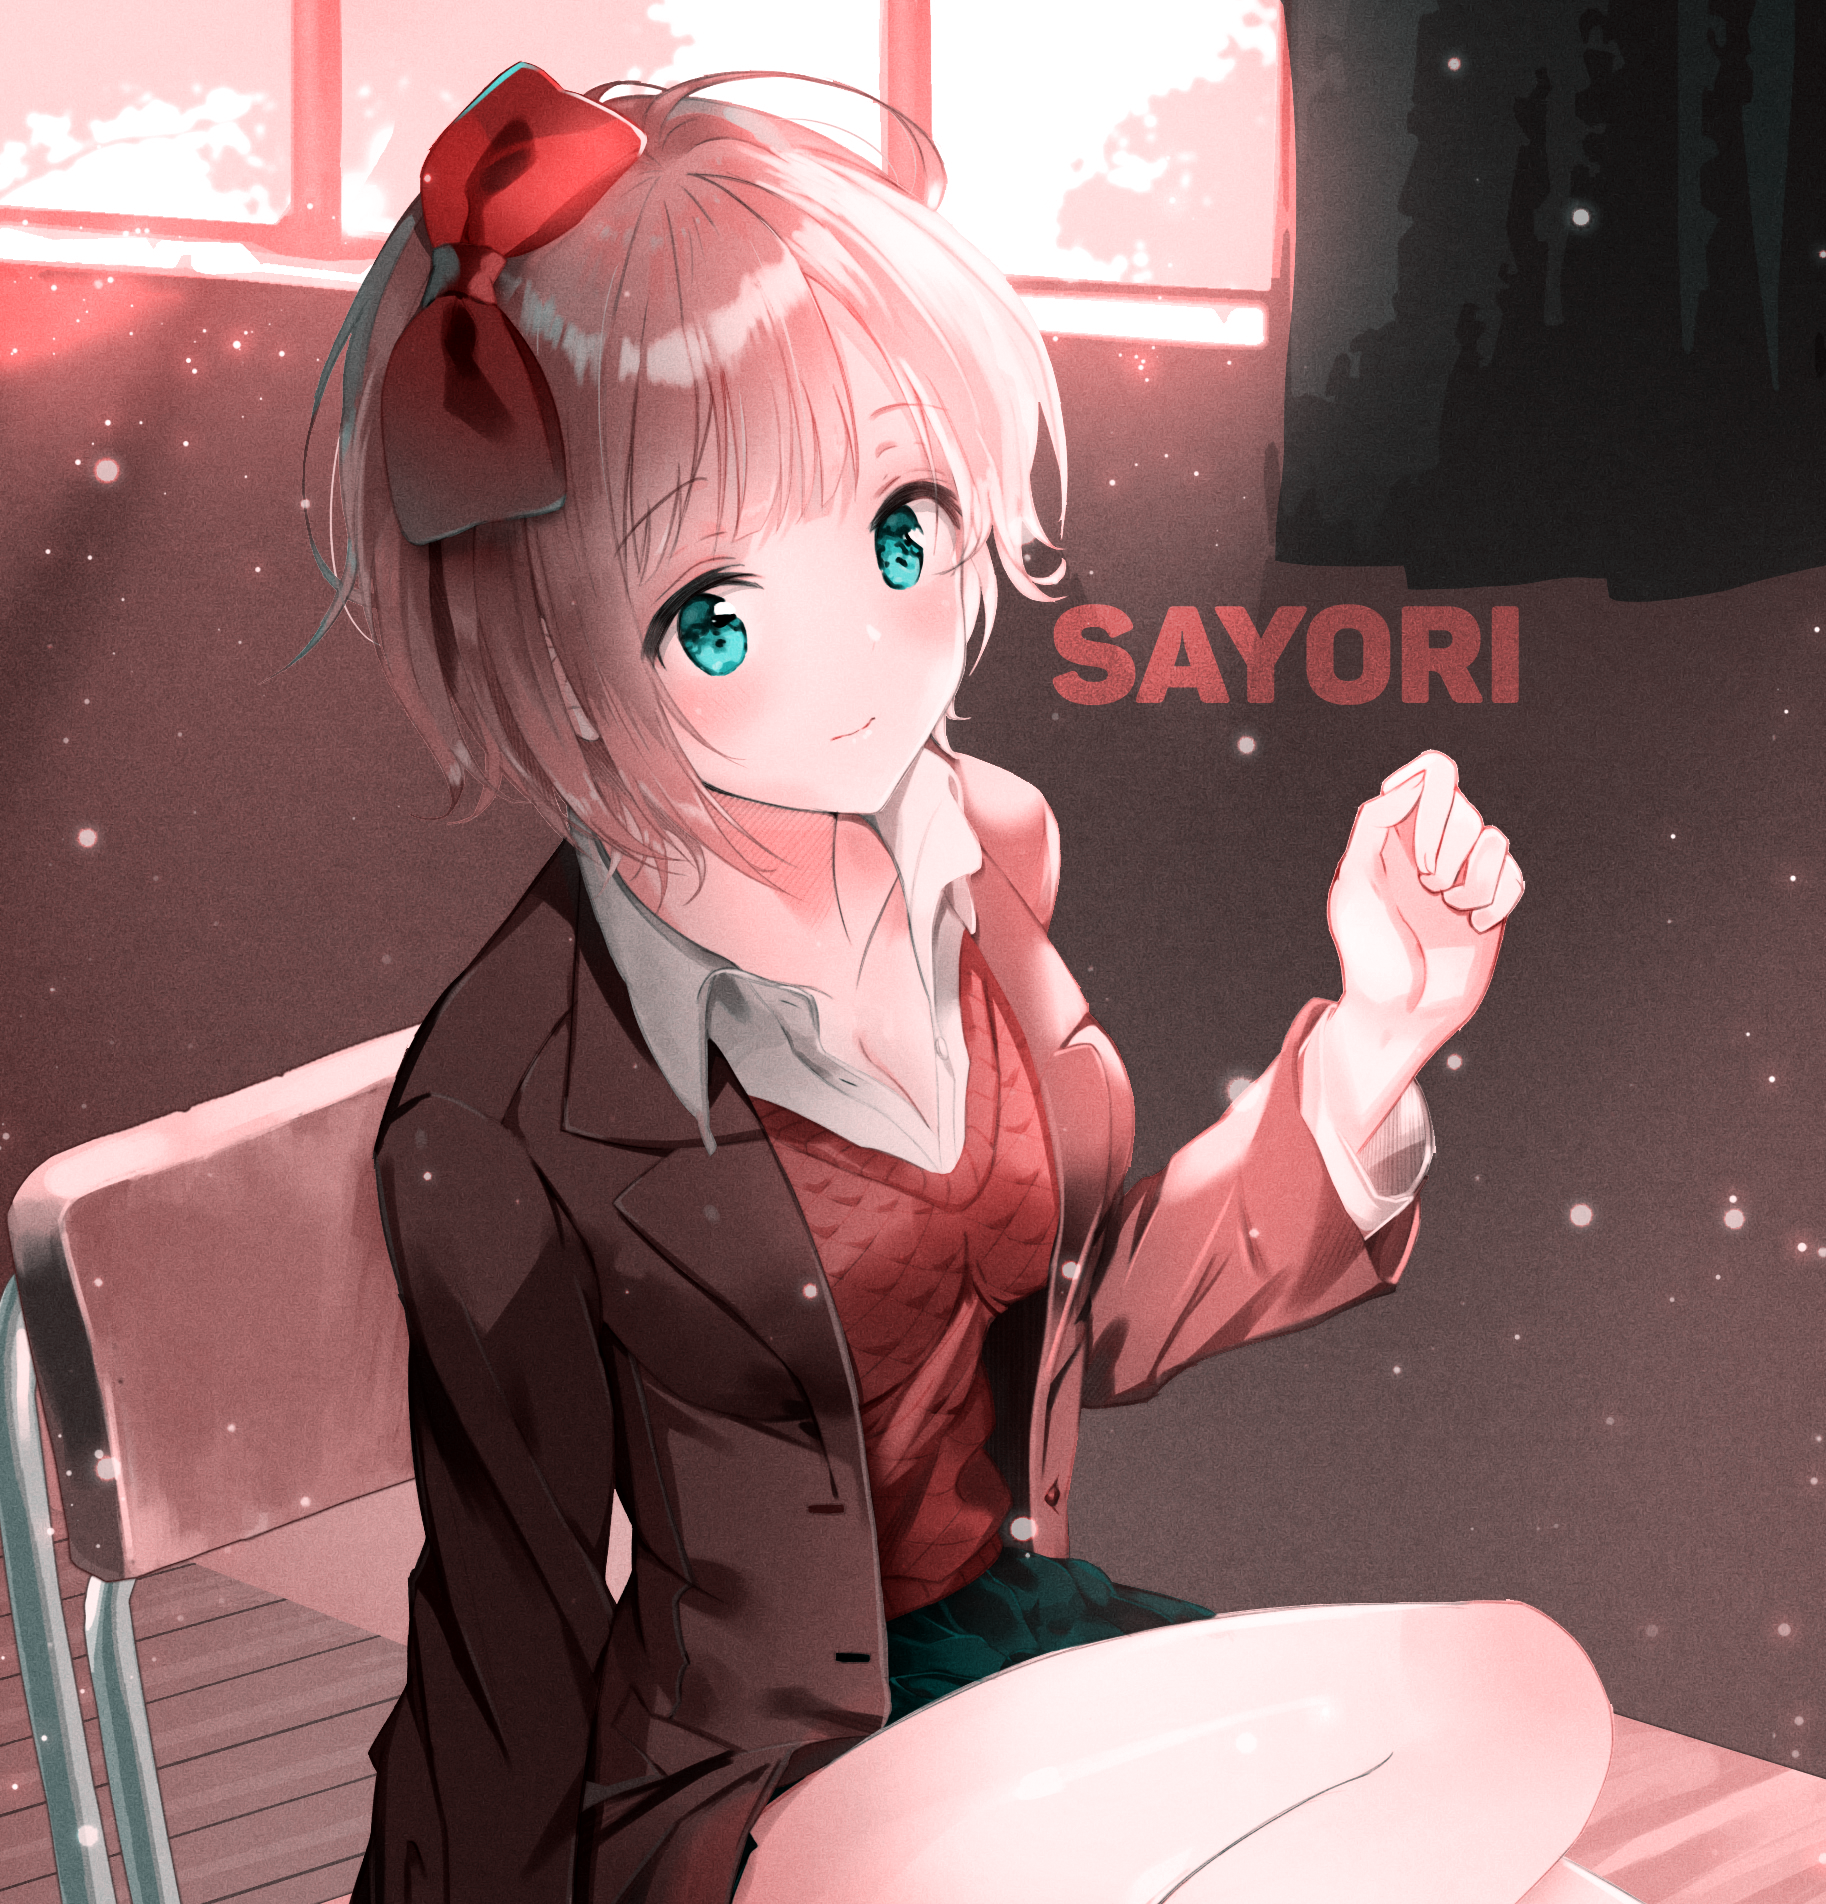 Anime 1826x1904 Doki Doki Literature Club Sayori (Doki Doki Literature Club) anime girls blue eyes novel visual novel video games fan art video game characters red bow short hair pink hair boobs closed mouth window floating particles sunlight pink legs cleavage hair bows